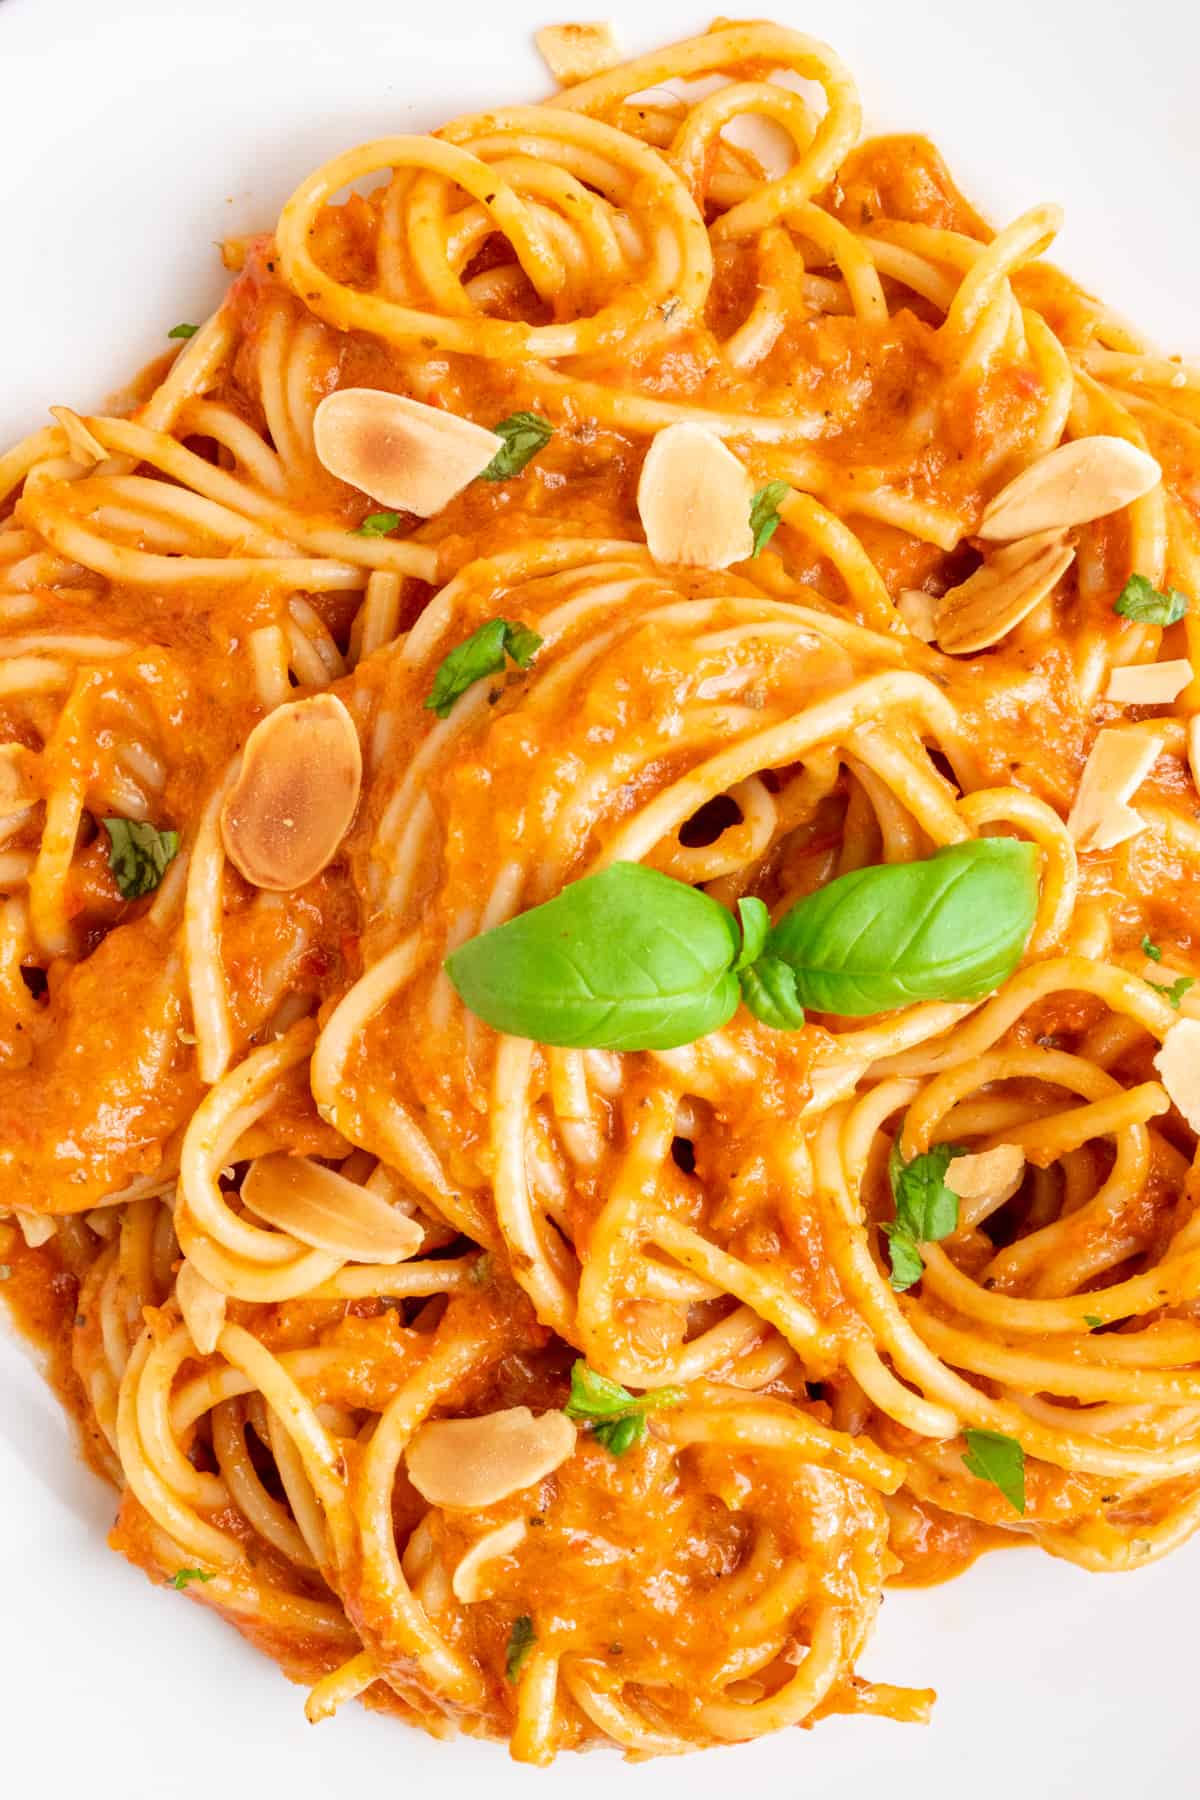 Pasta coated in a thick, dark orange sauce and topped with toasted almonds and fresh basil.